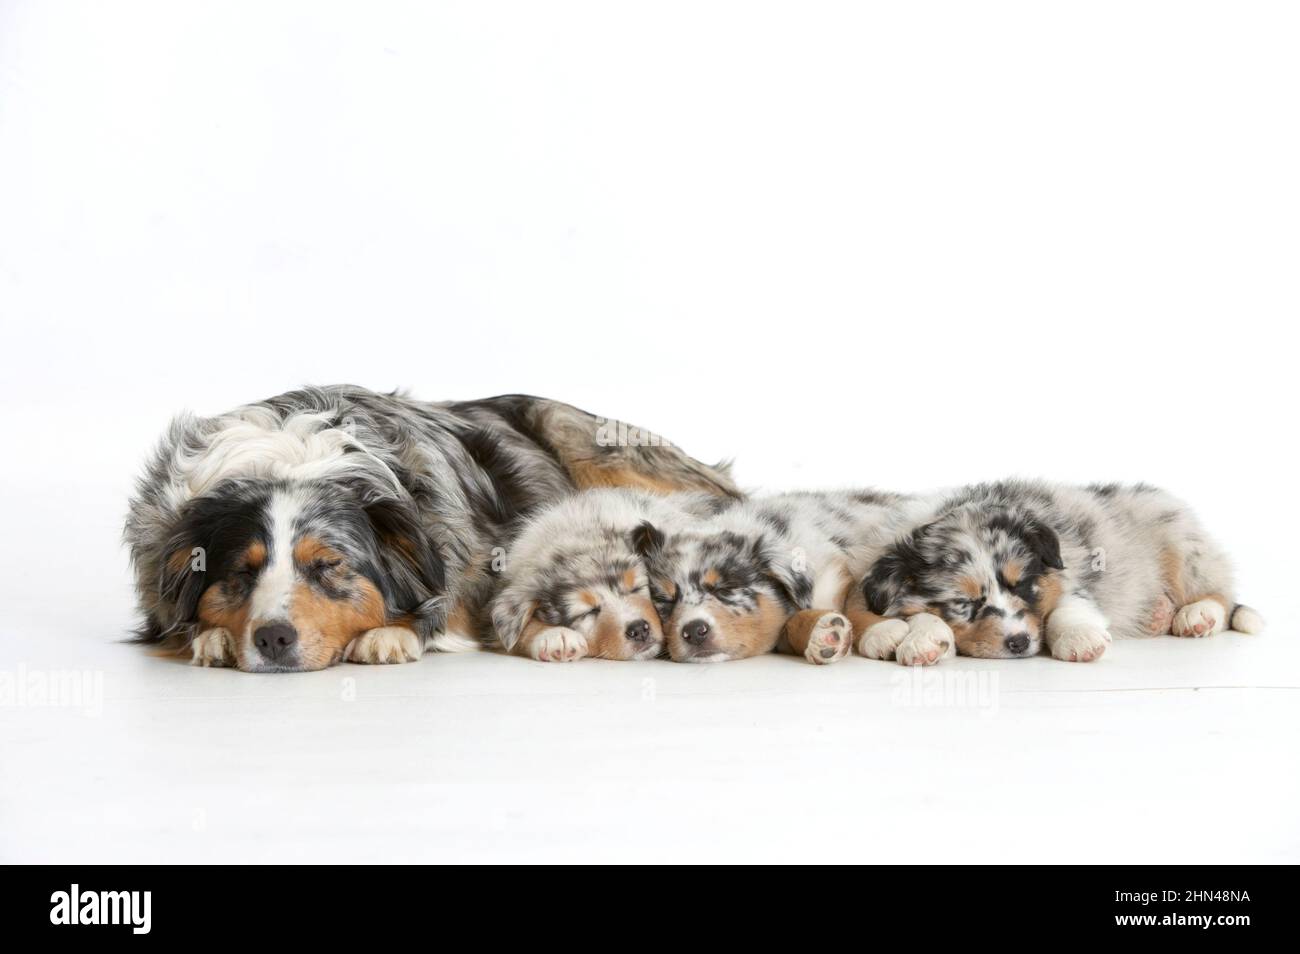 Australian Shepherd. Sleeping mother with three sleeping puppies. Studio picture against a white background. Germany Stock Photo